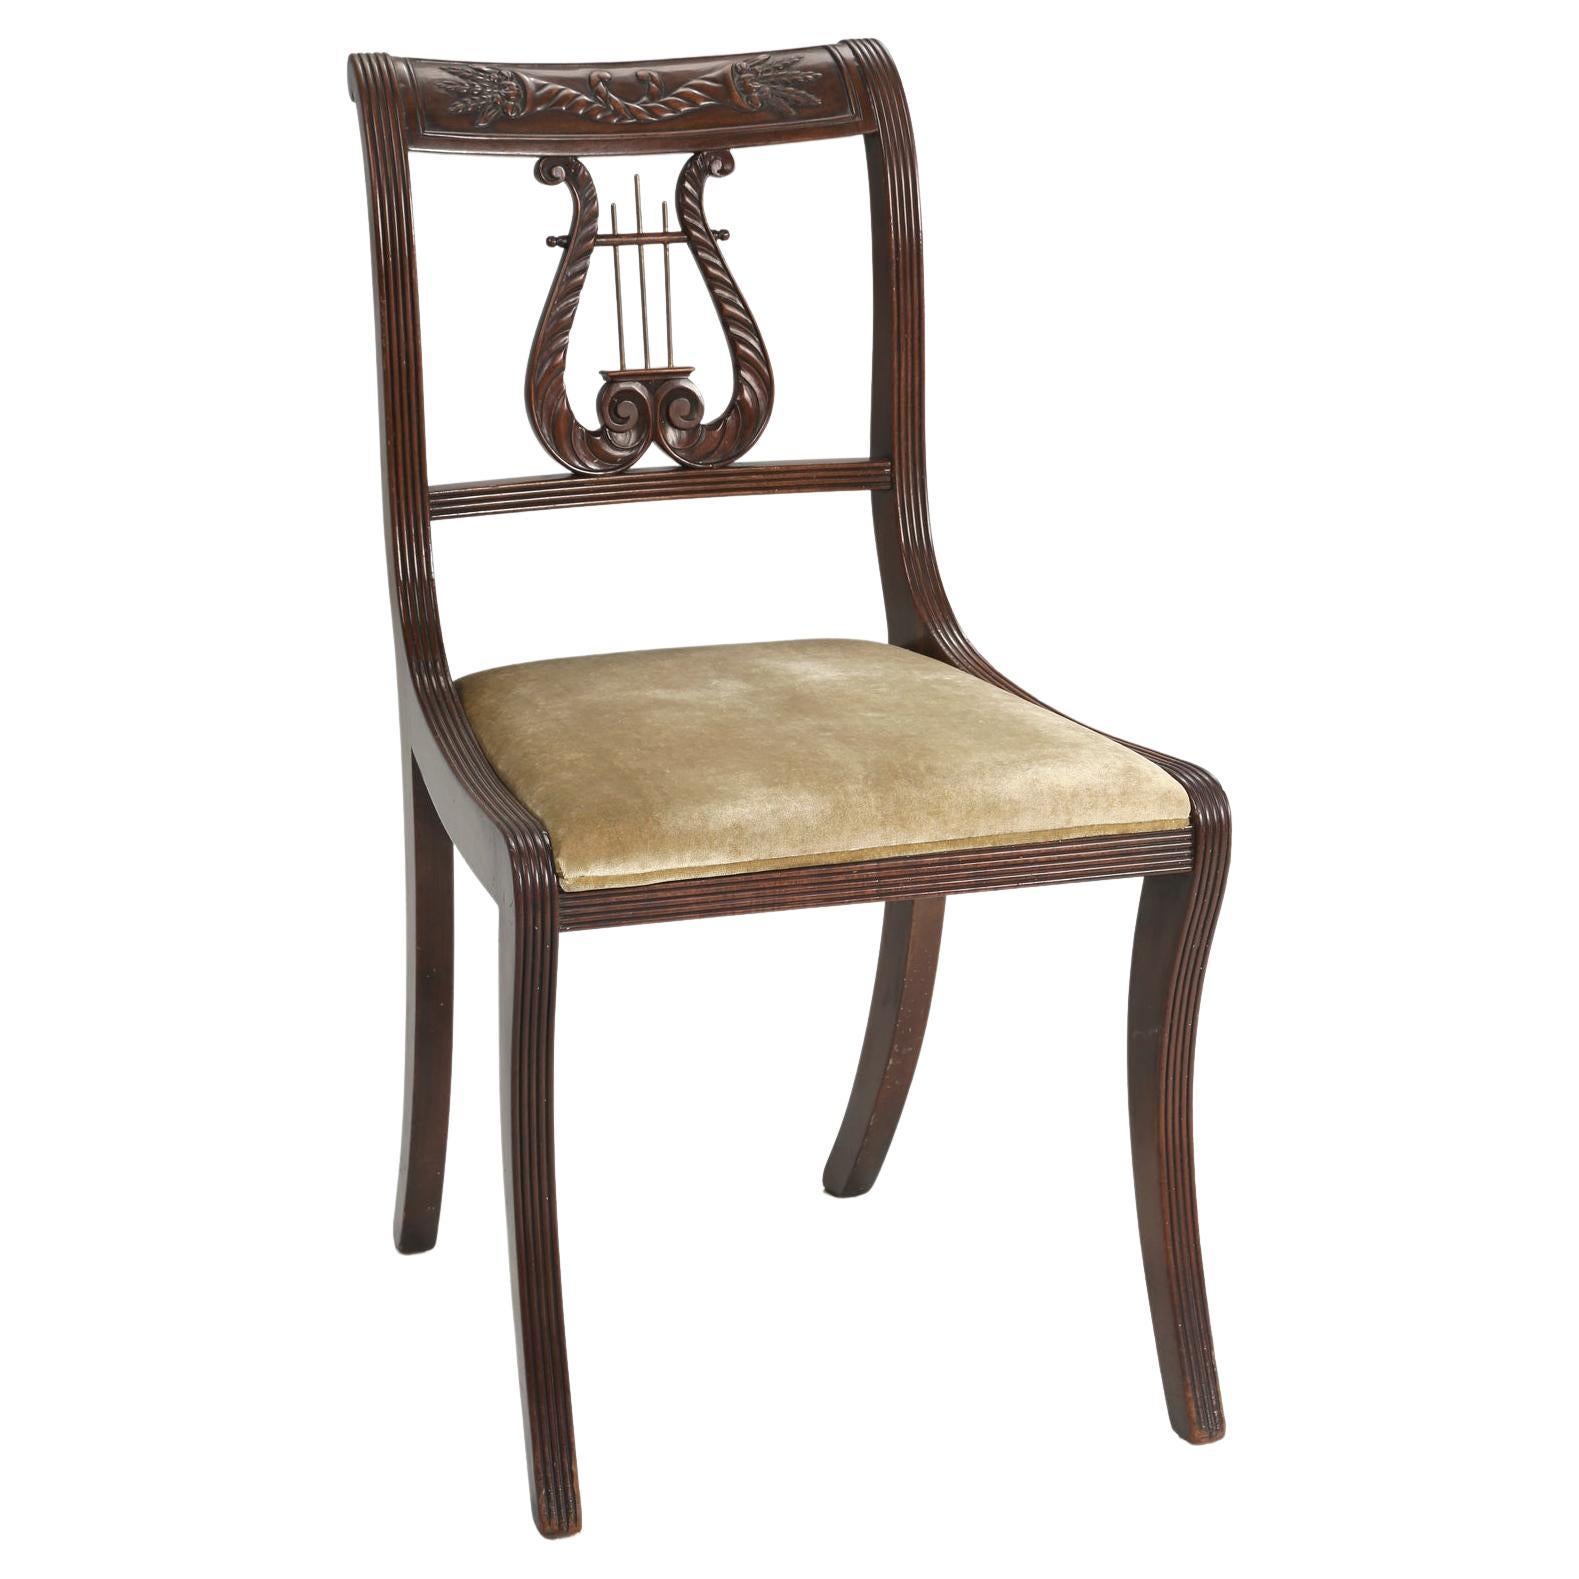 Antique English Mahogany Lyre Back Side Chair circa Mid-1800's Restored